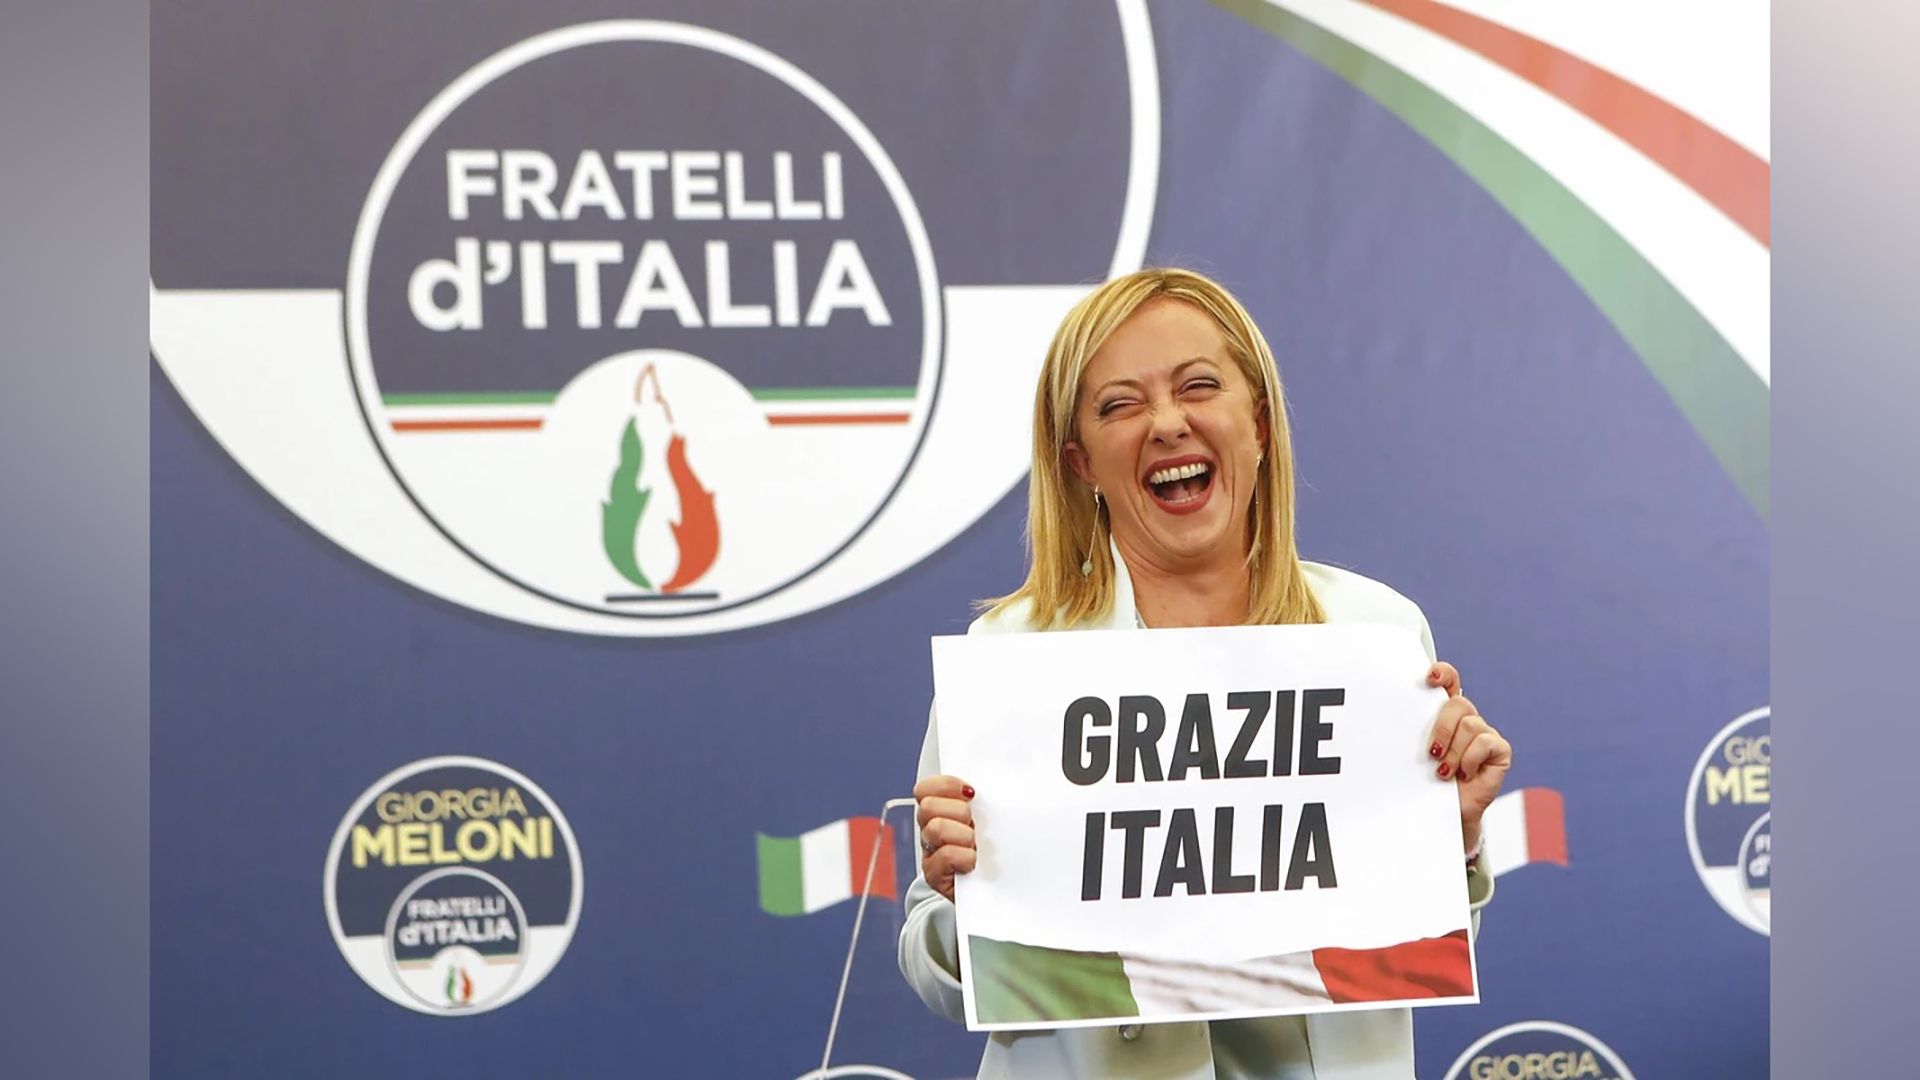 Giorgia Meloni – Leader of the 'Brothers of Italy' party